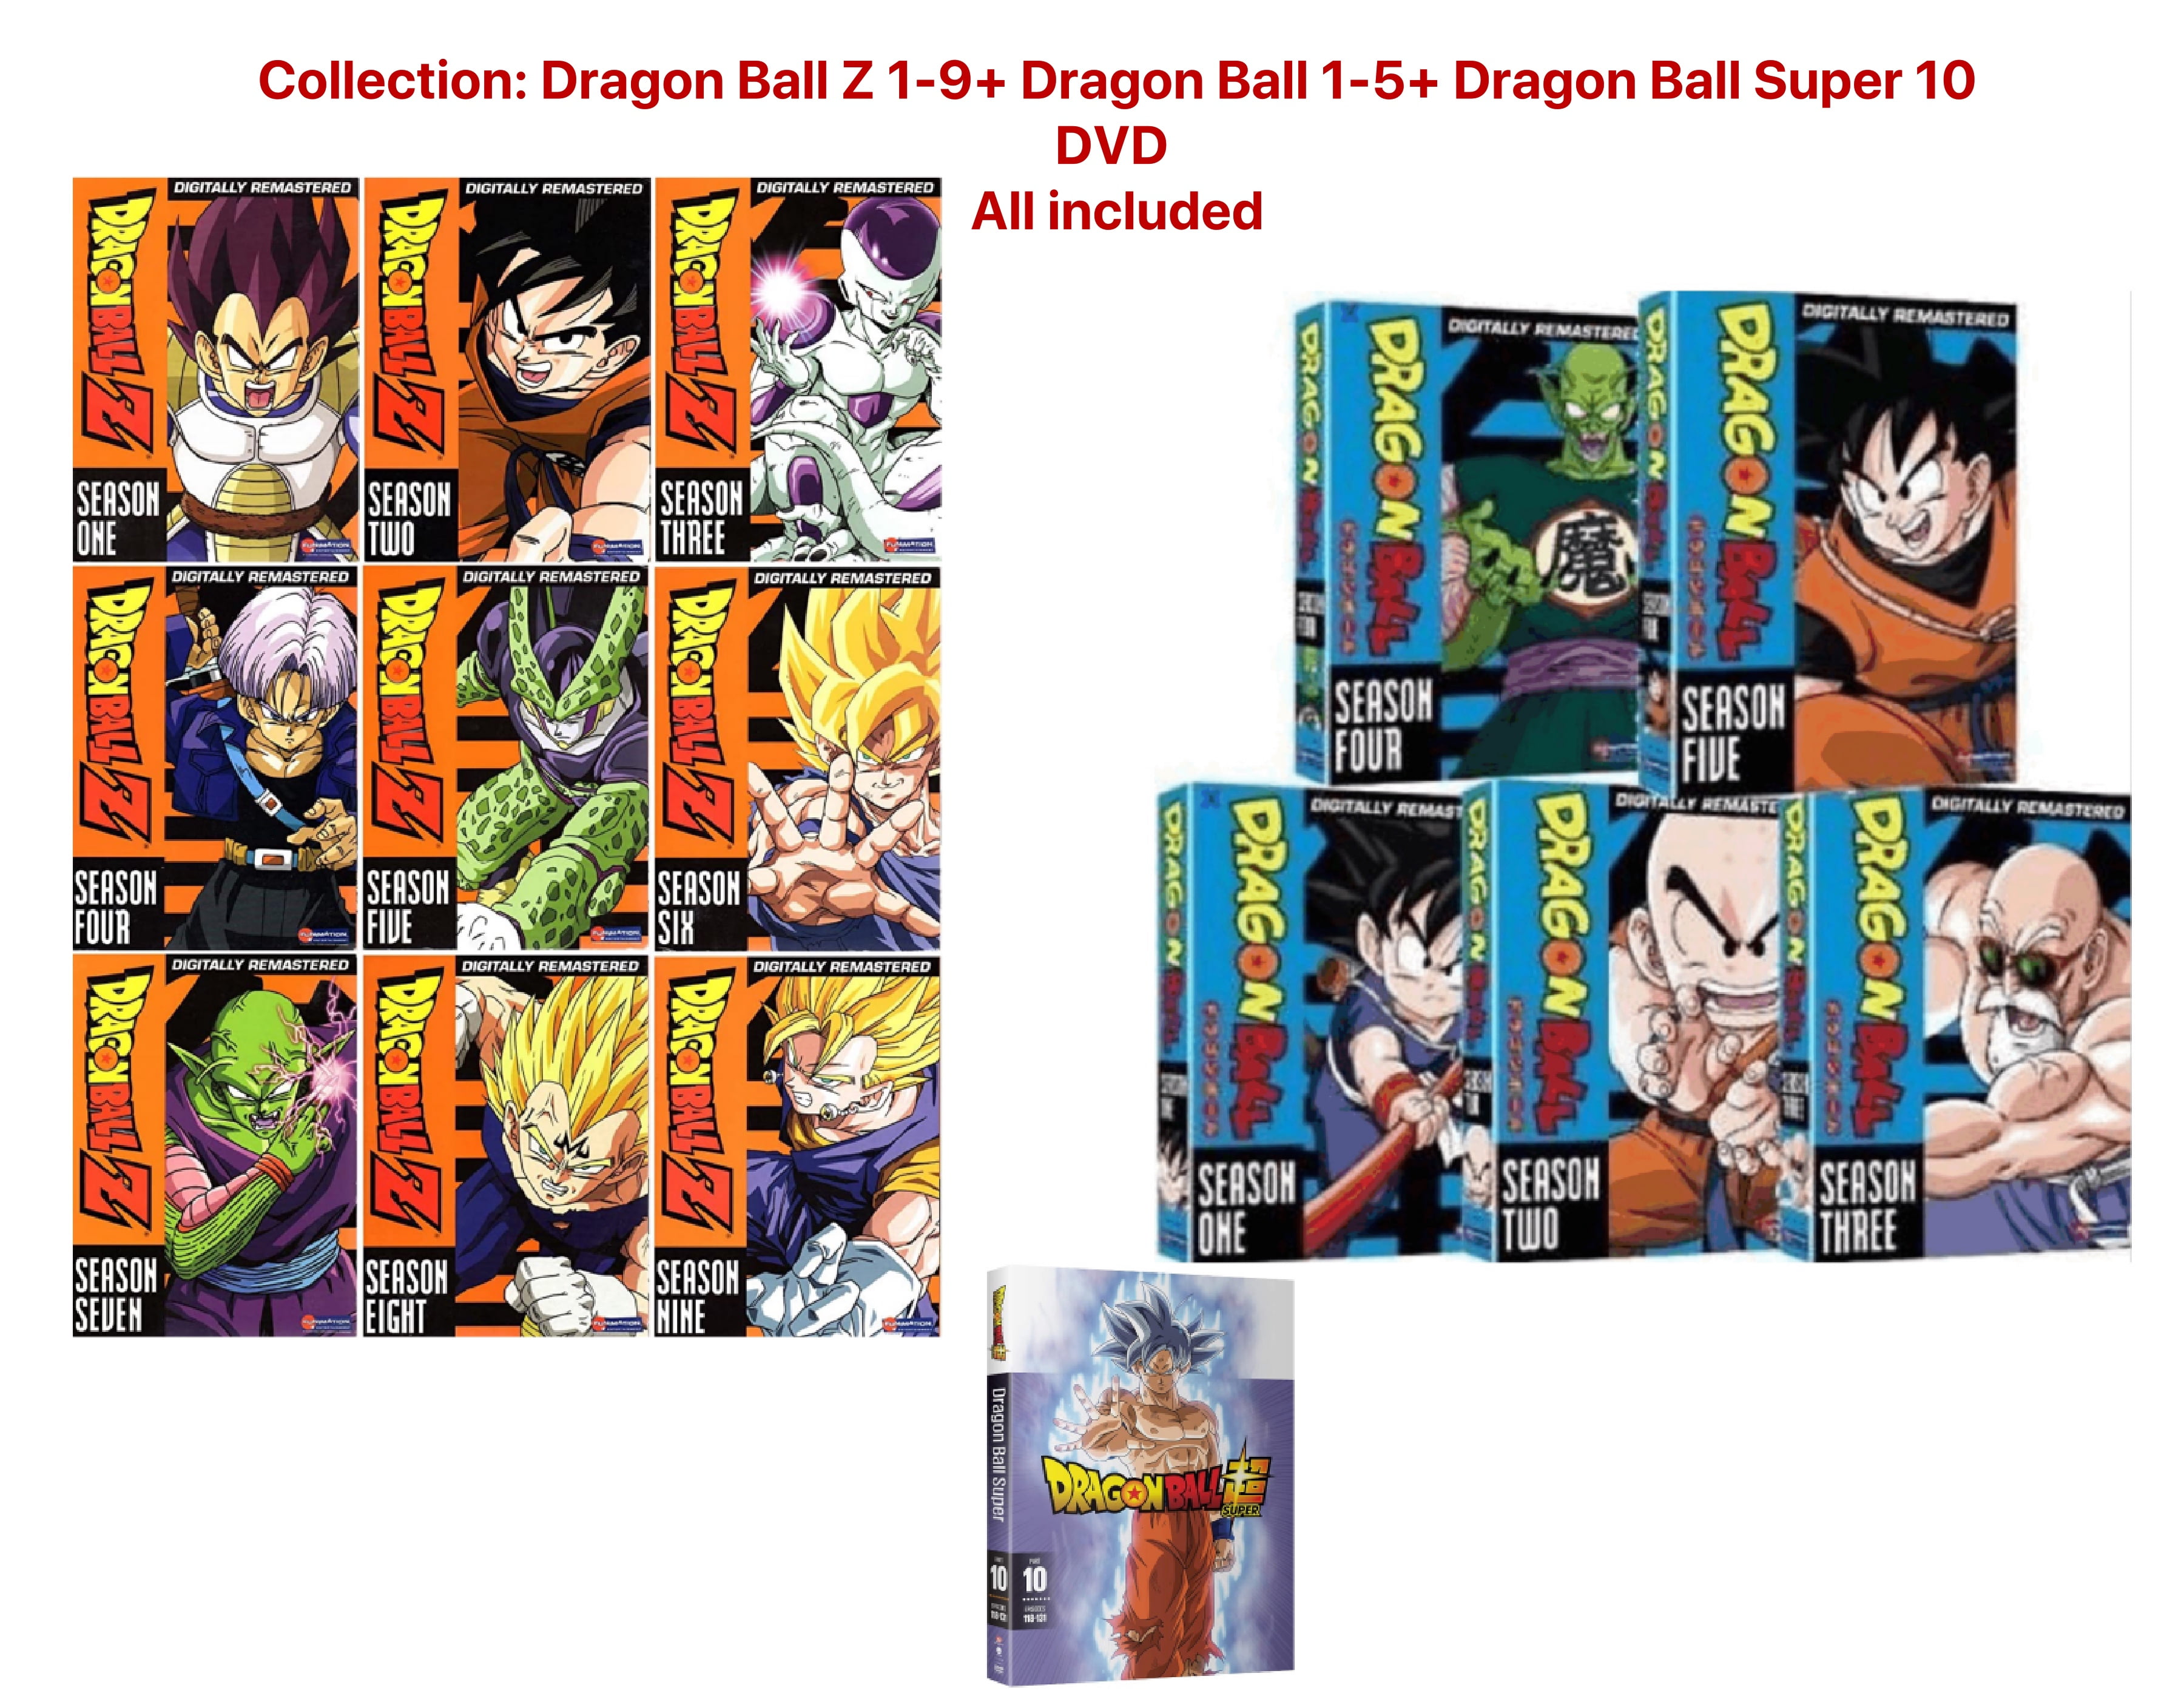 dinesh charan recommends dragon ball uncut episodes pic